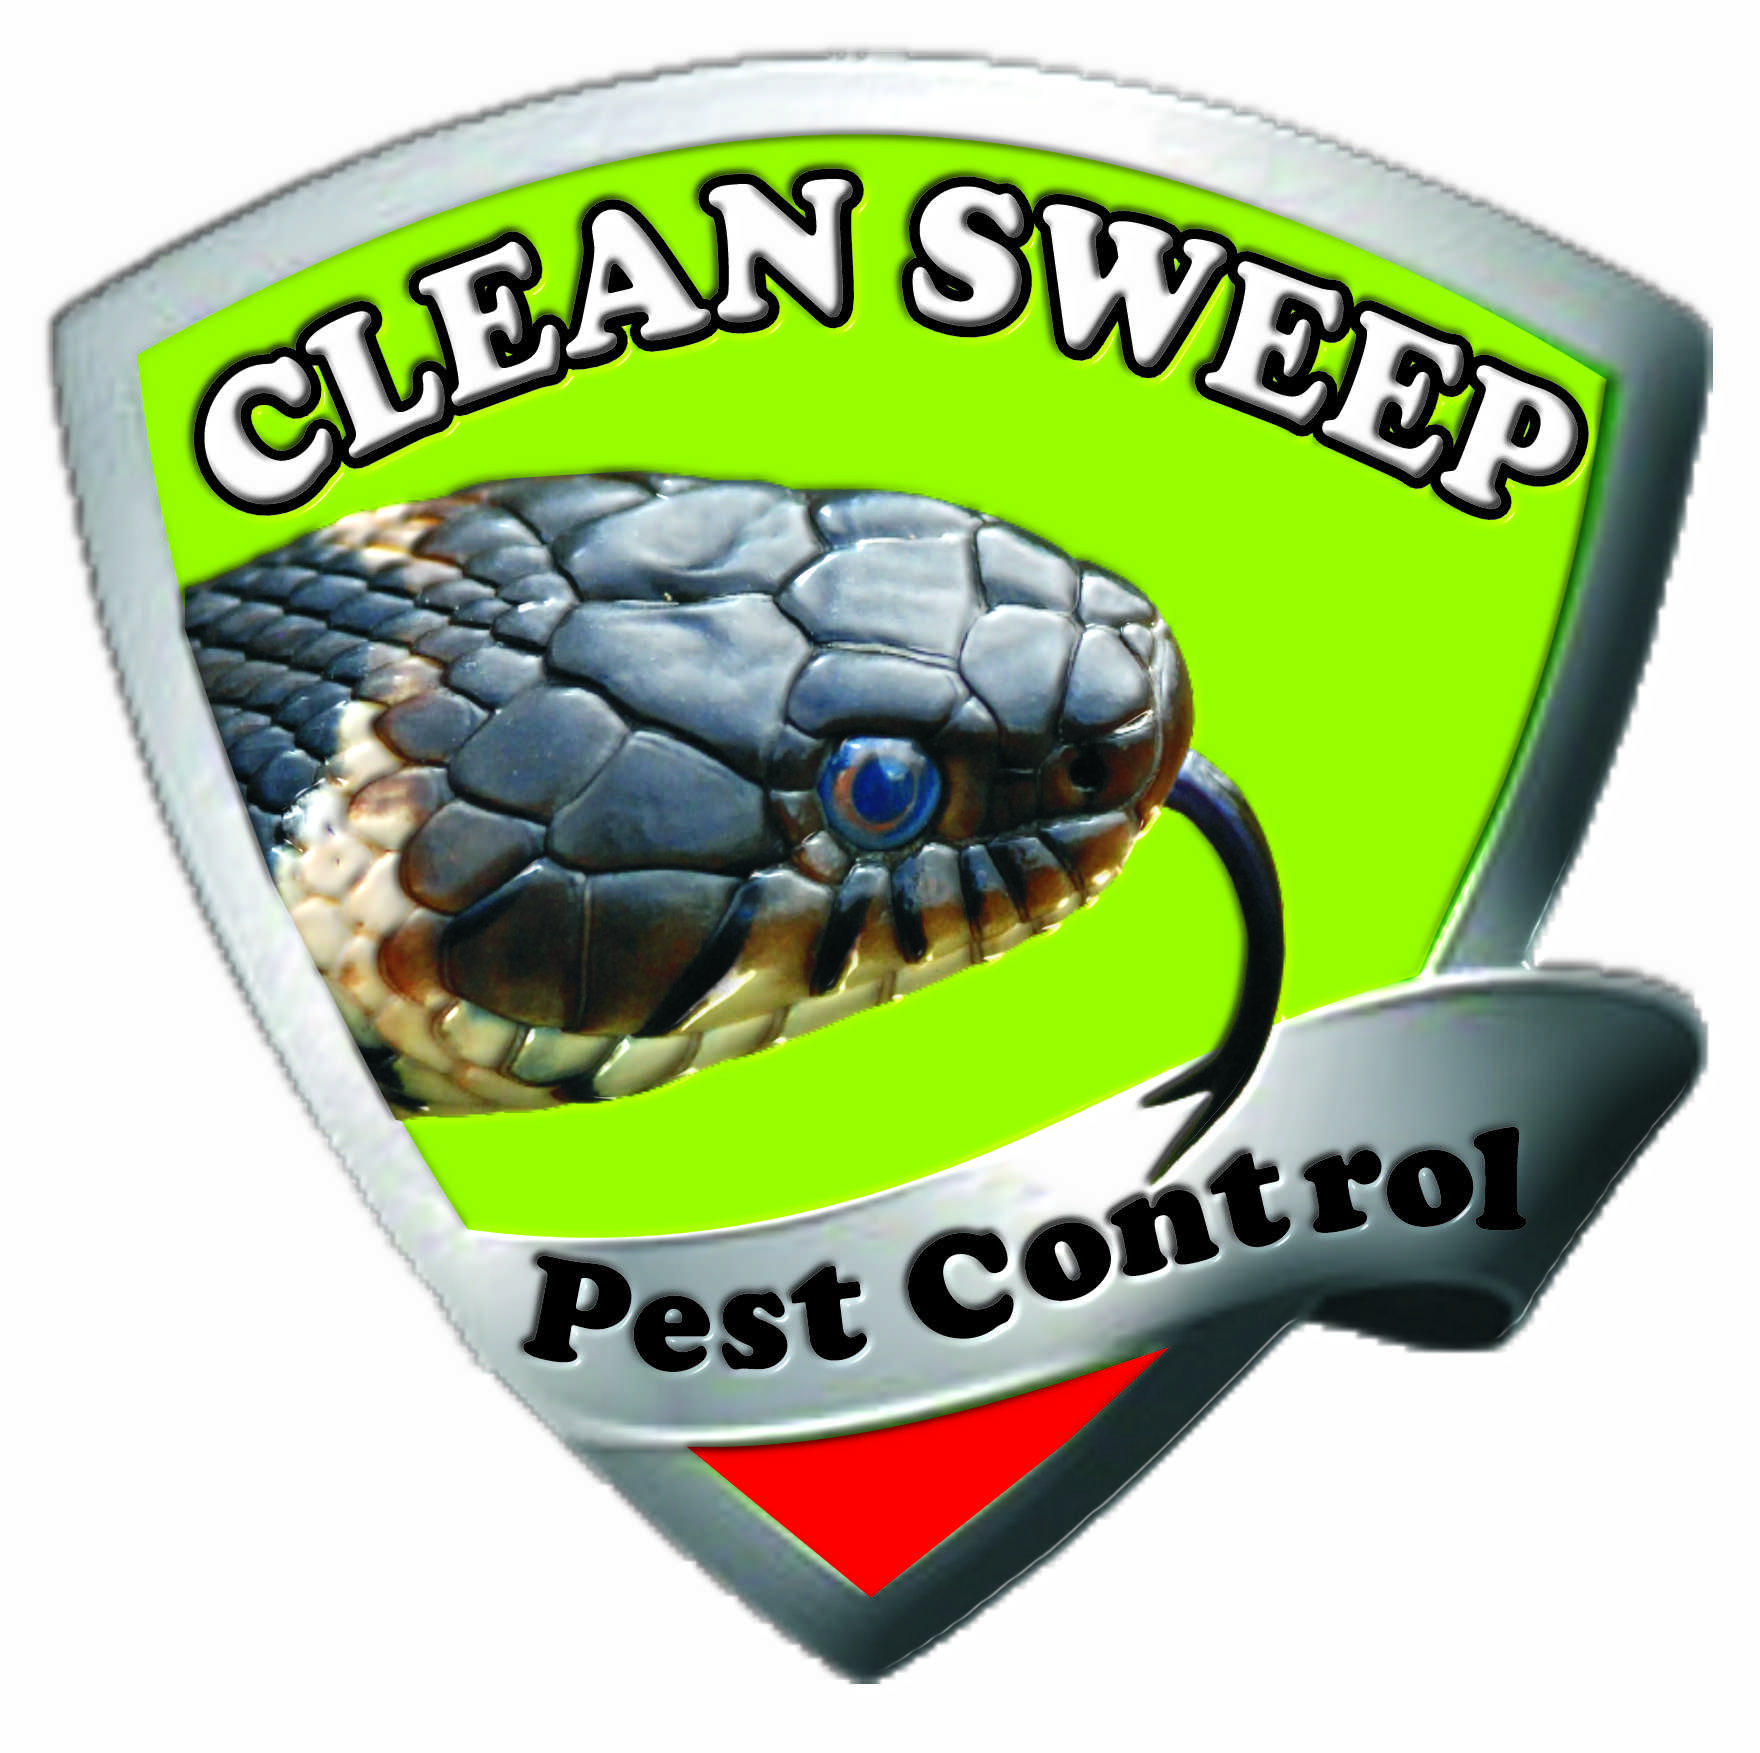 Pest Control Services Isb